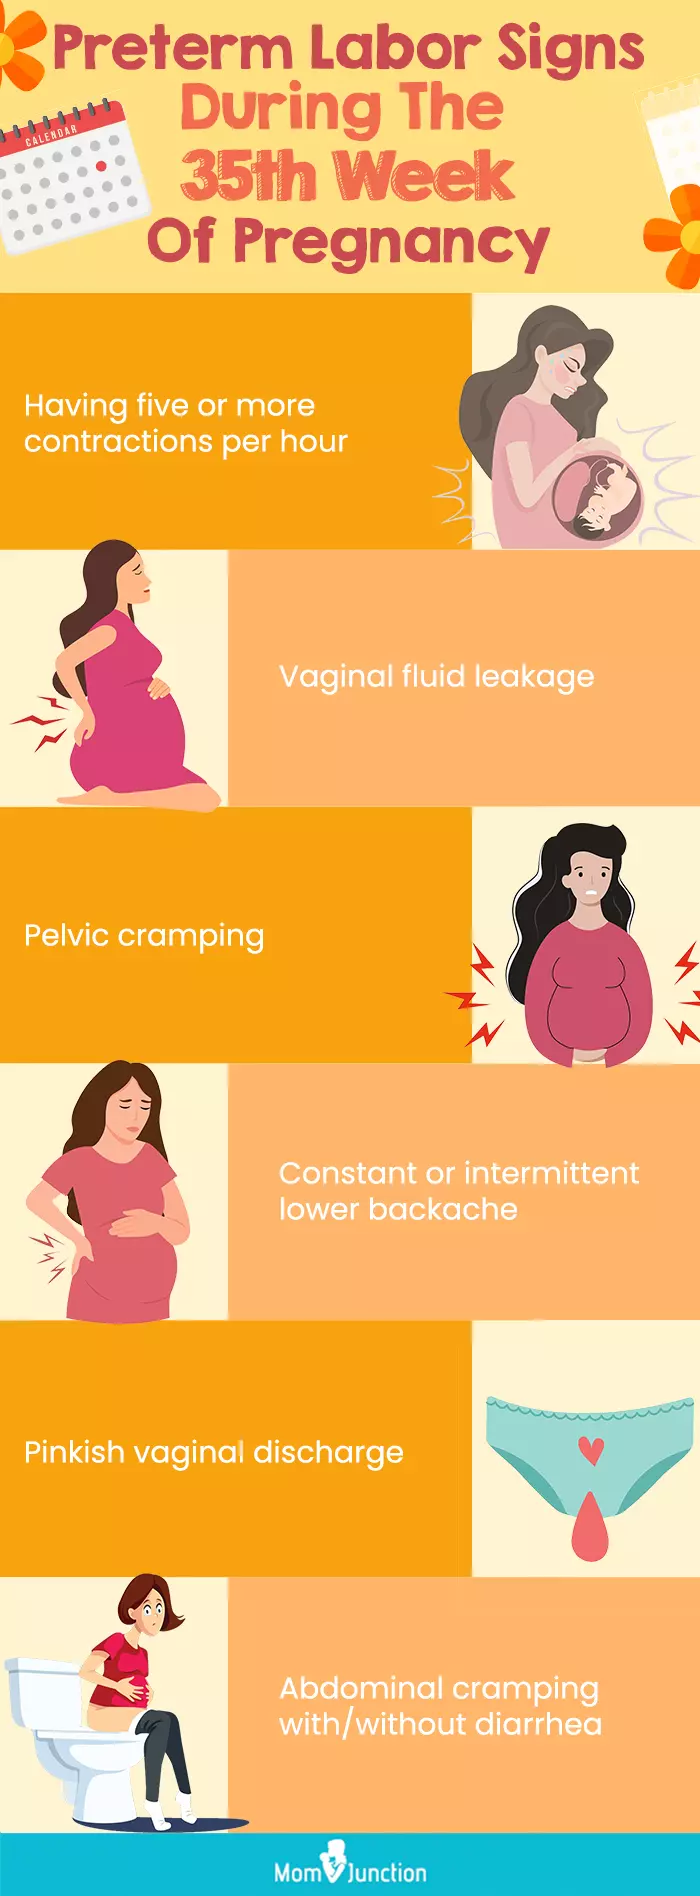 preterm labor signs during the 35th week of pregnancy (infographic)